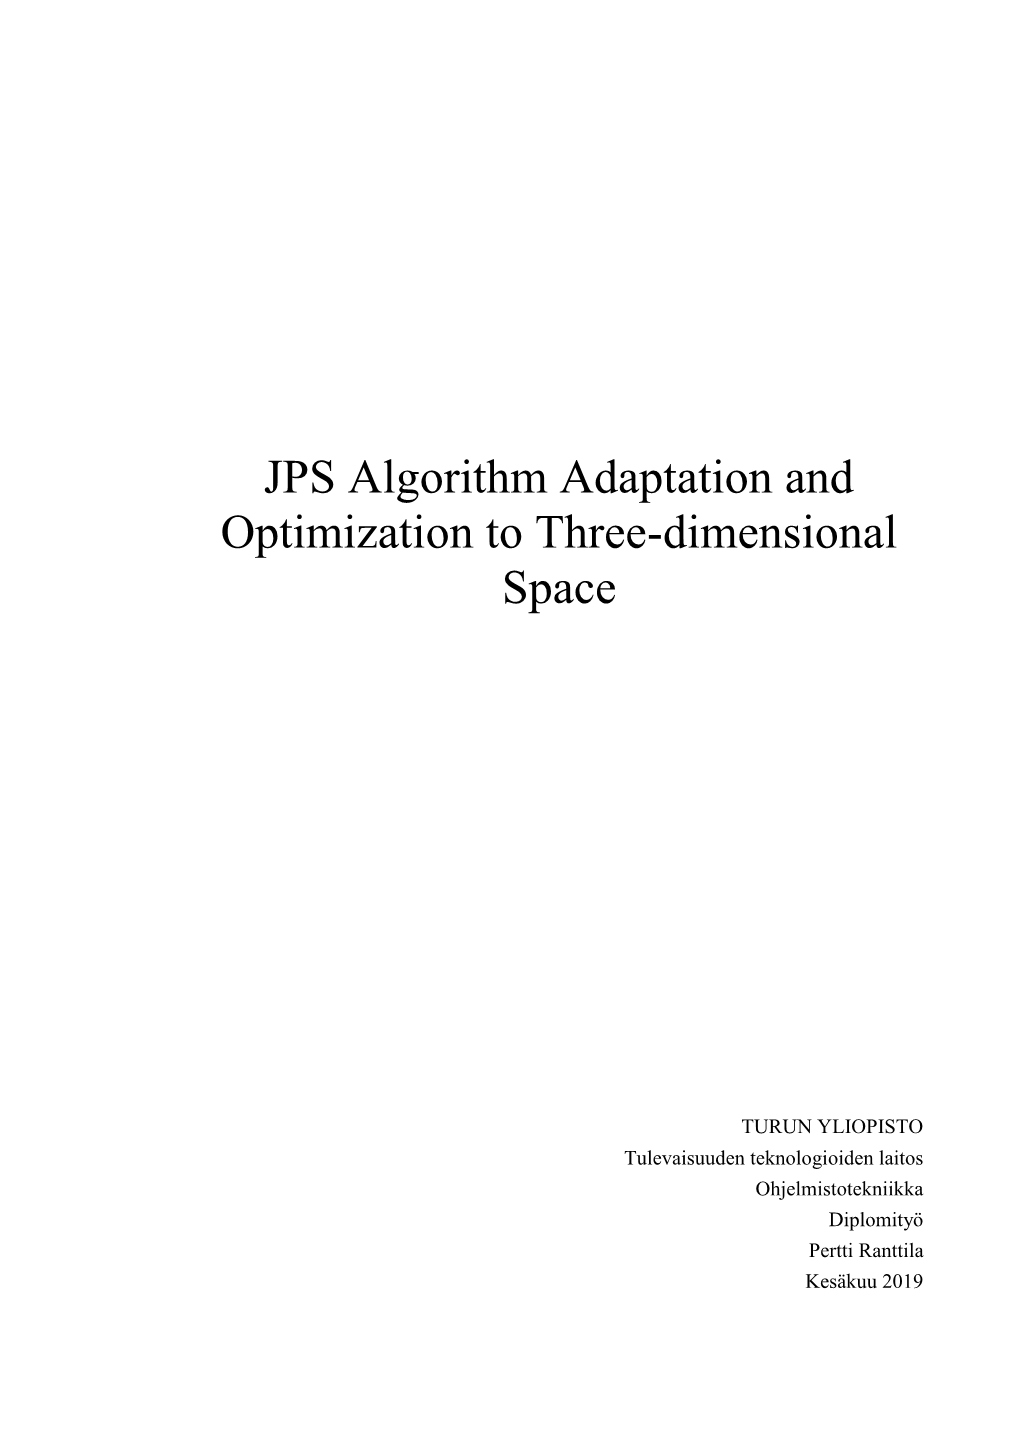 JPS Algorithm Adaptation and Optimization to Three-Dimensional Space